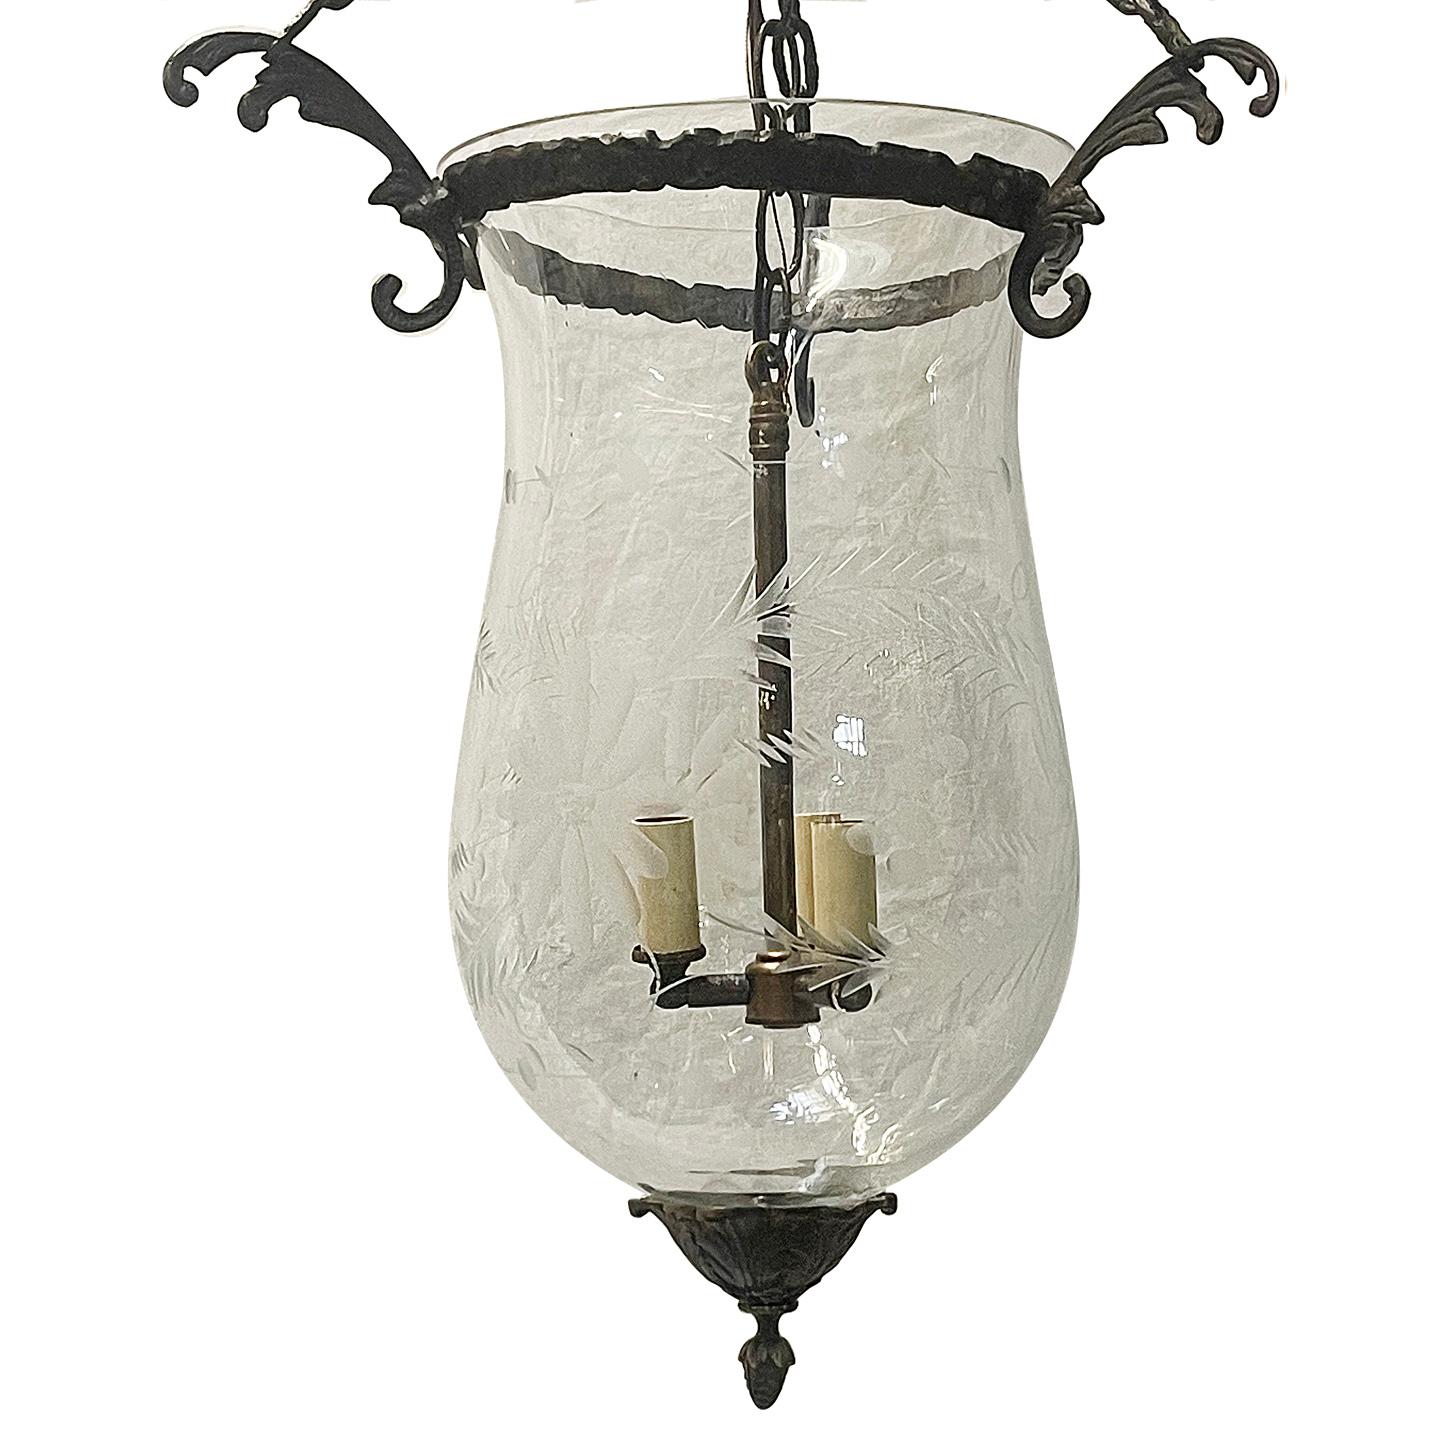 A circa 1940's etched glass lantern with patinated bronze fittings and etched glass. 3 Candelabra lights.

Measurements:
Height: 34